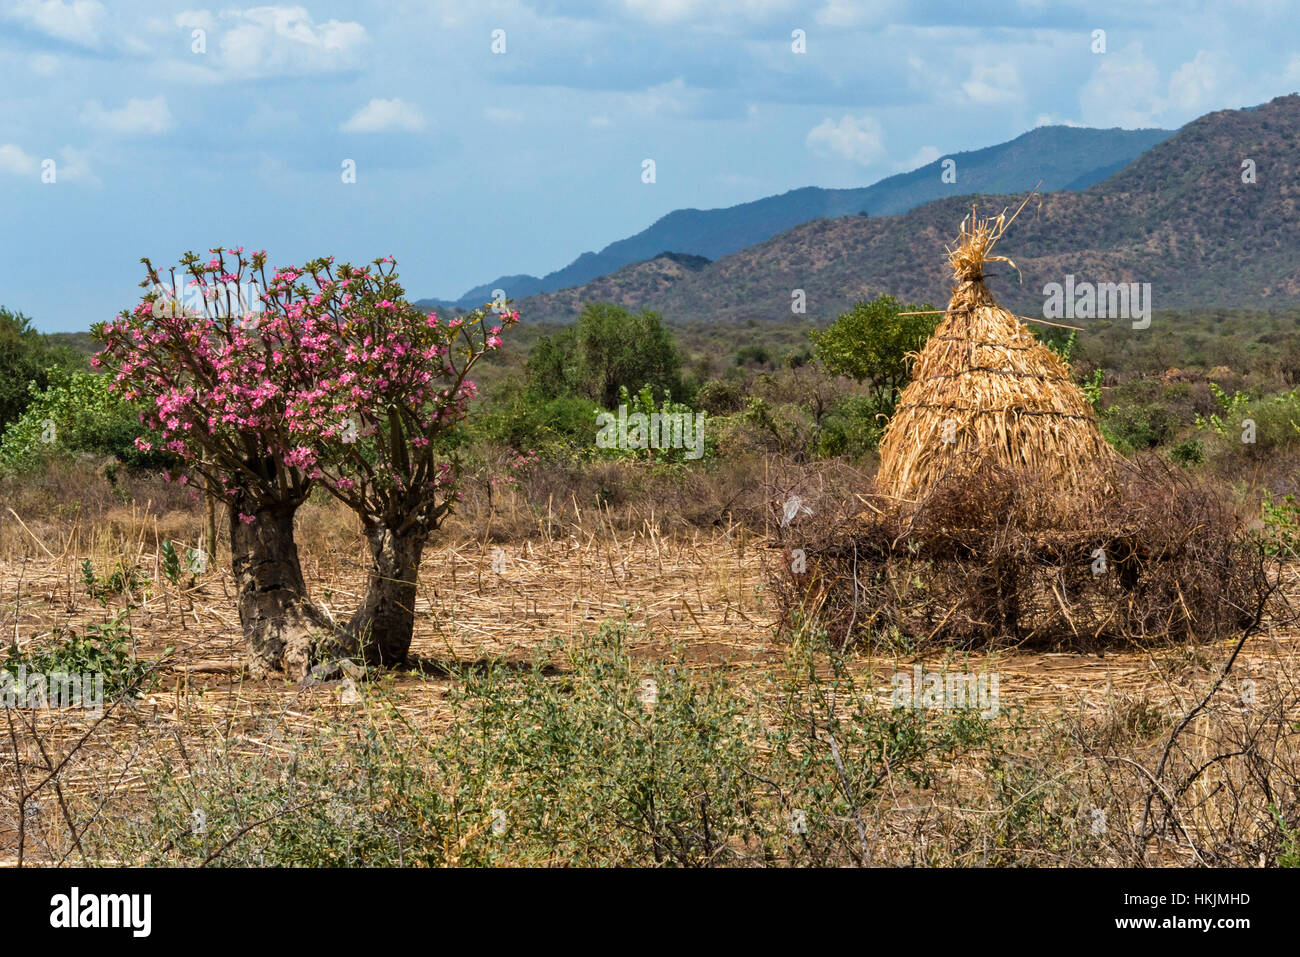 Sand roses and straw bundle in the mountain, Konso, Ethiopia Stock Photo